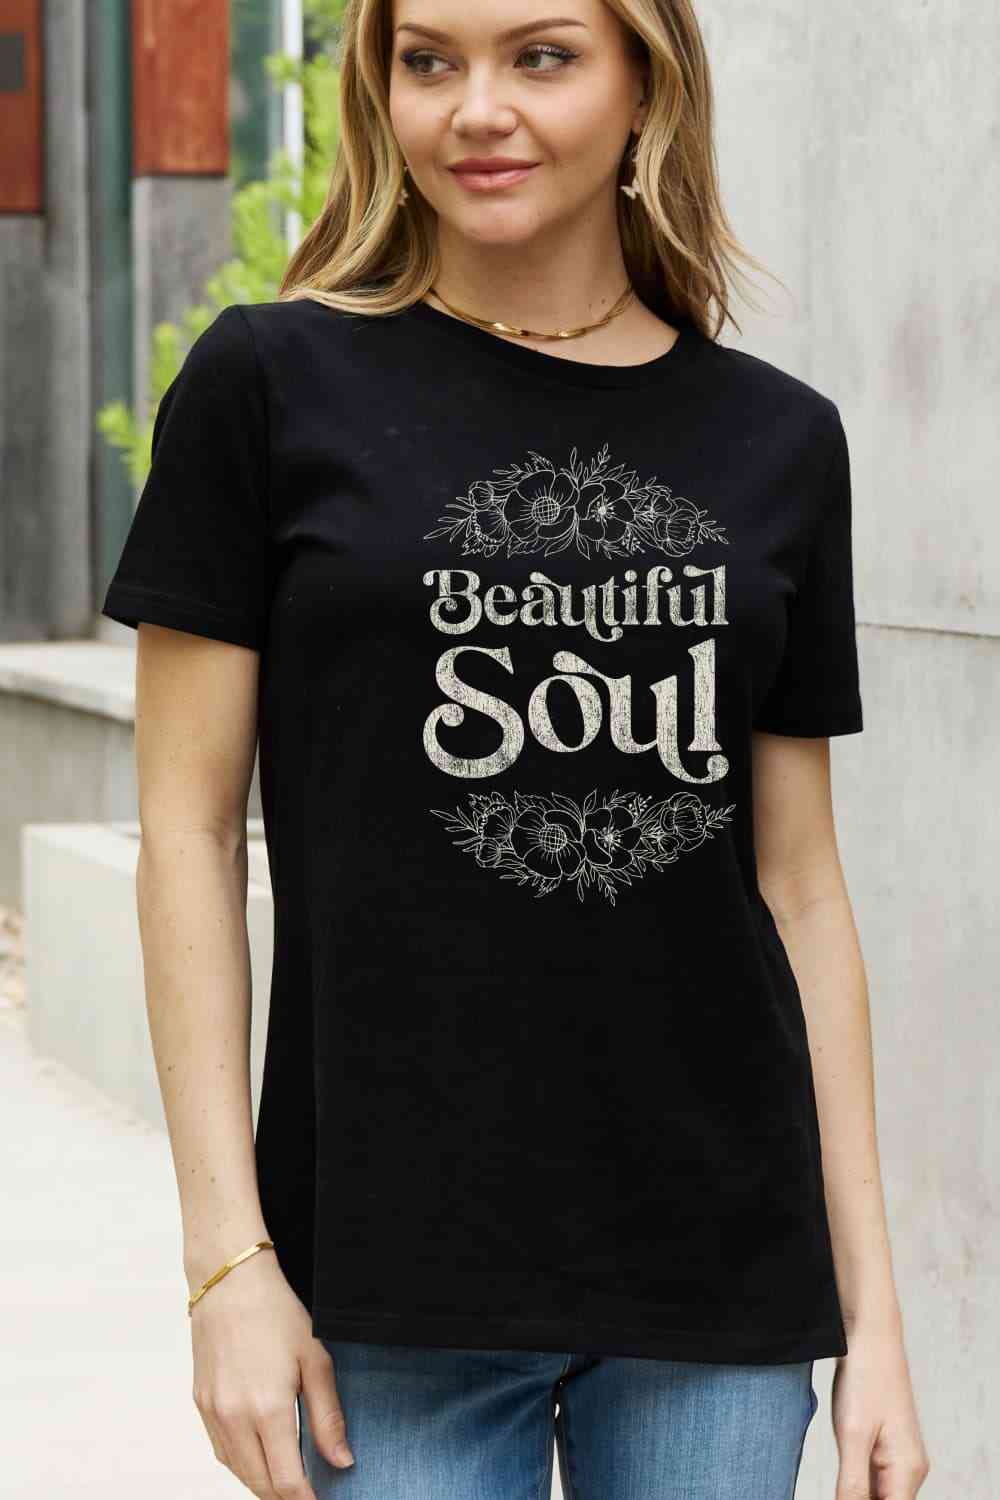 Simply Love Full Size BEAUTIFUL SOUL Graphic Cotton Tee